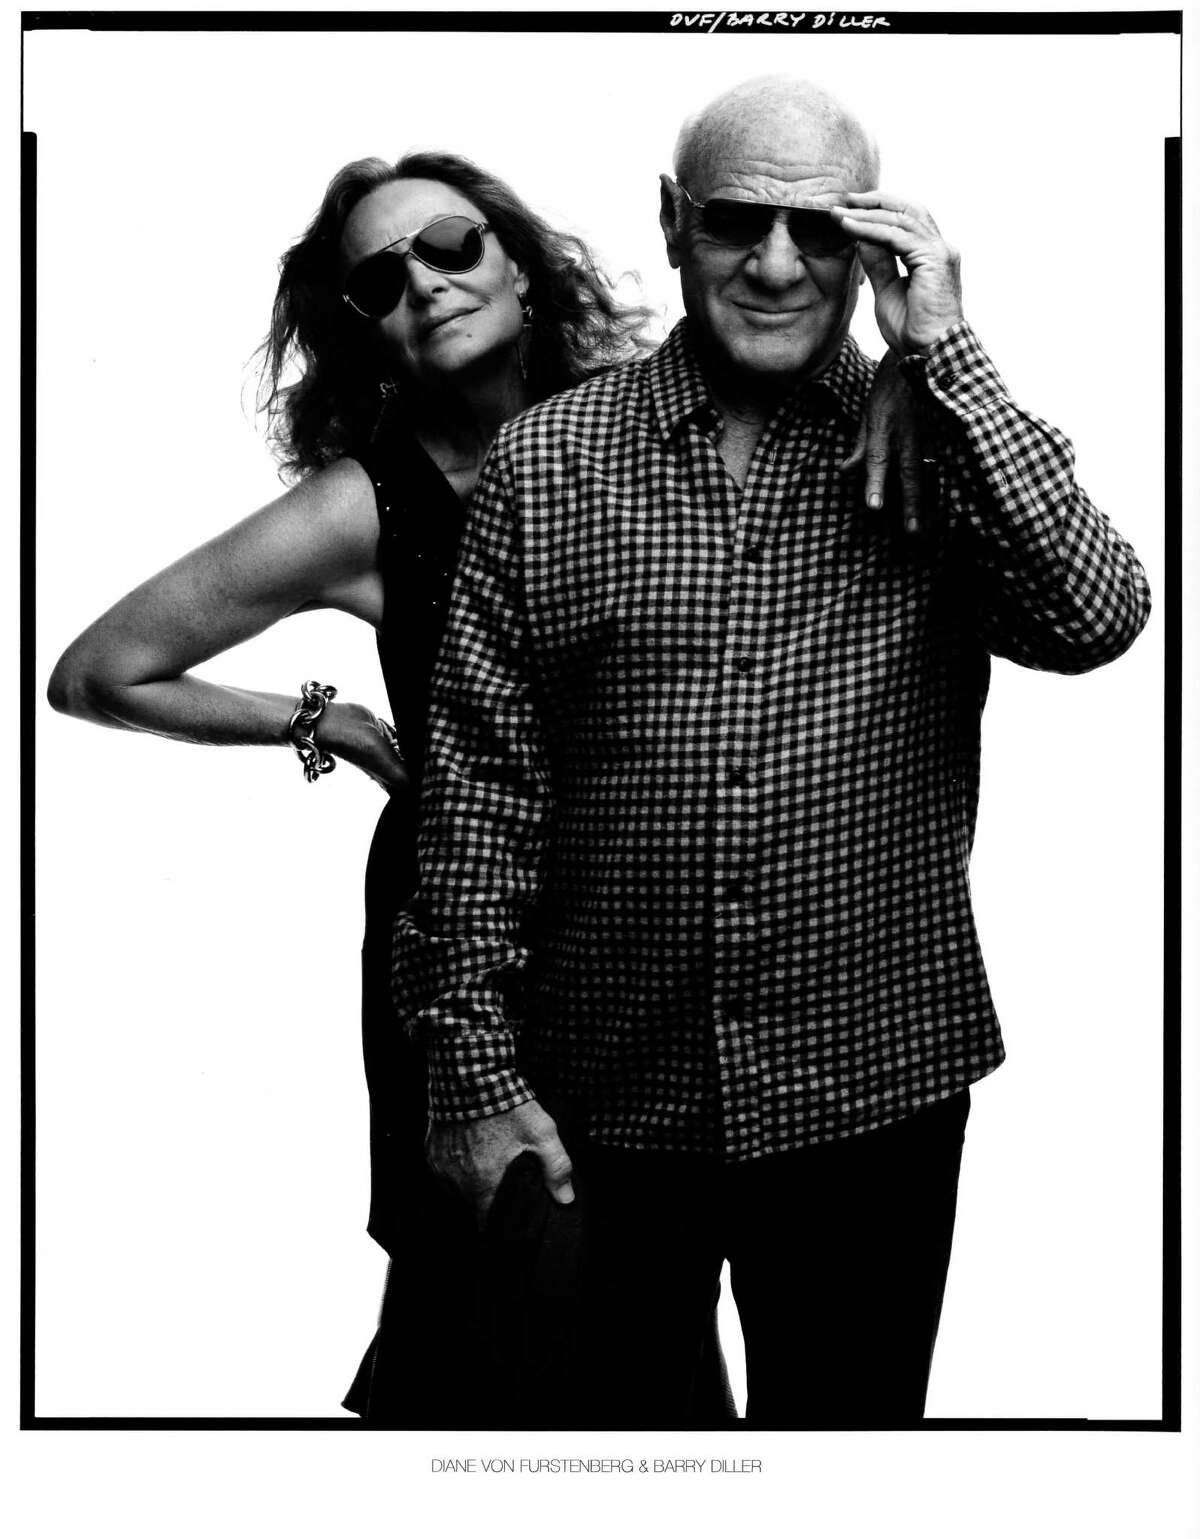 Fashion designer Diane von Furstenberg, famed for creating the wrap dress in the 1970s and a vibrant force in the fashion industry, with her second husband, movie industry executive Barry Diller.